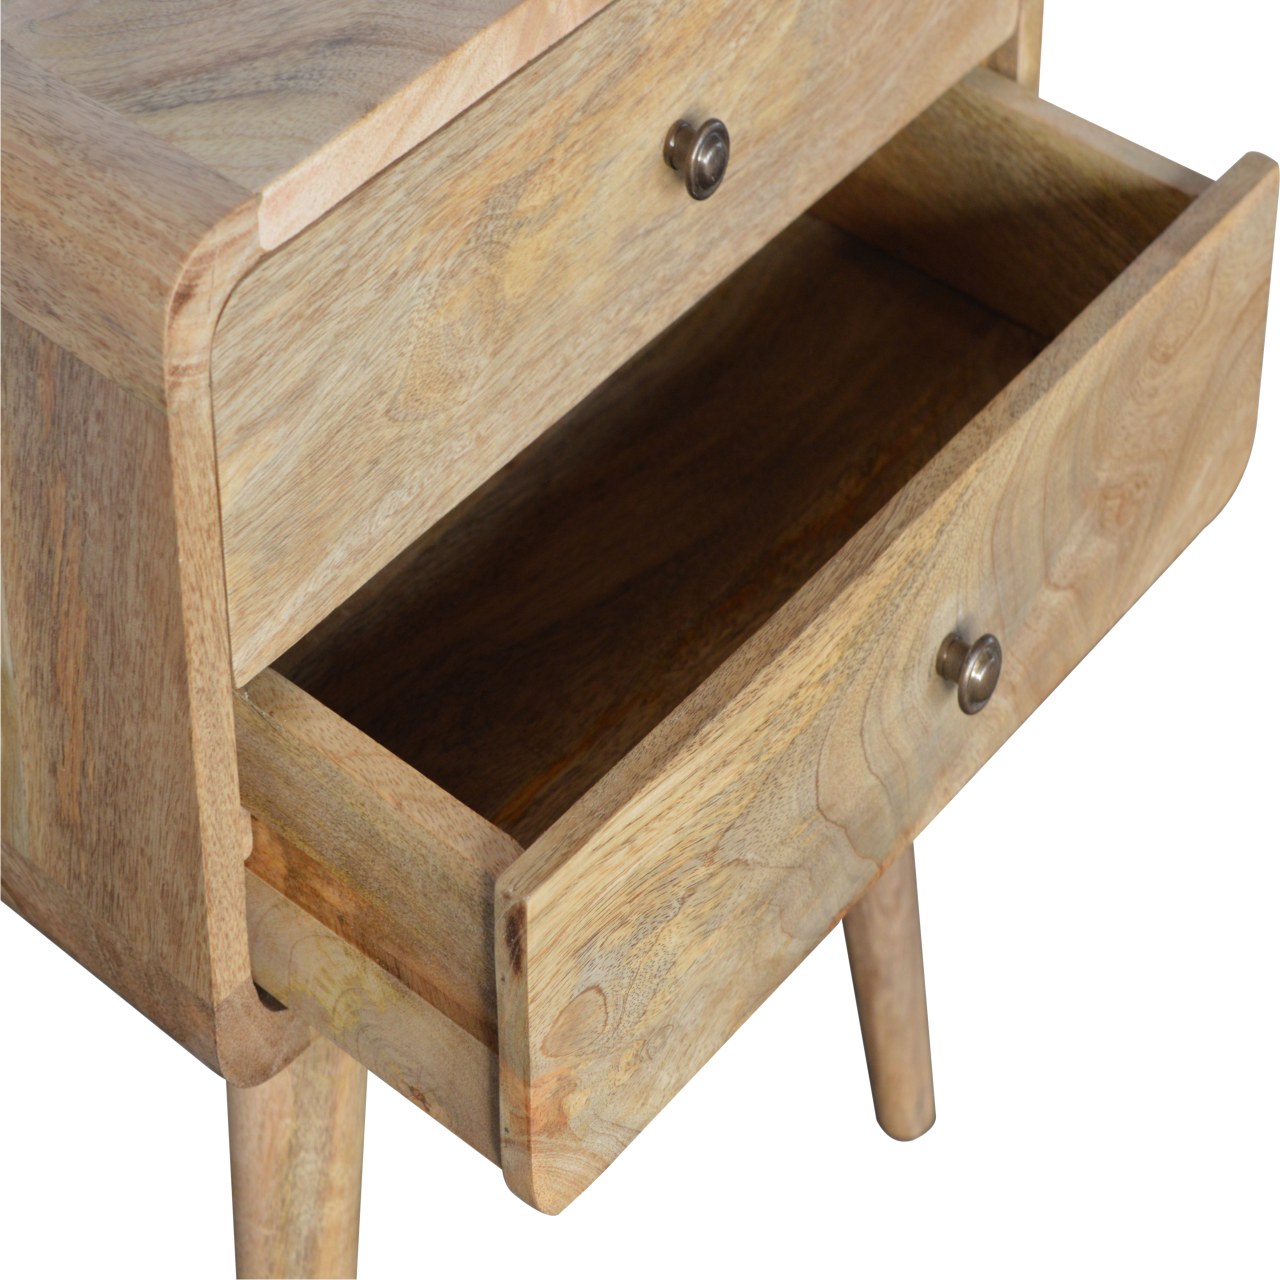 Modal solid wood bedside table with 2 drawers in a natural oak-ish finish | malletandplane.com